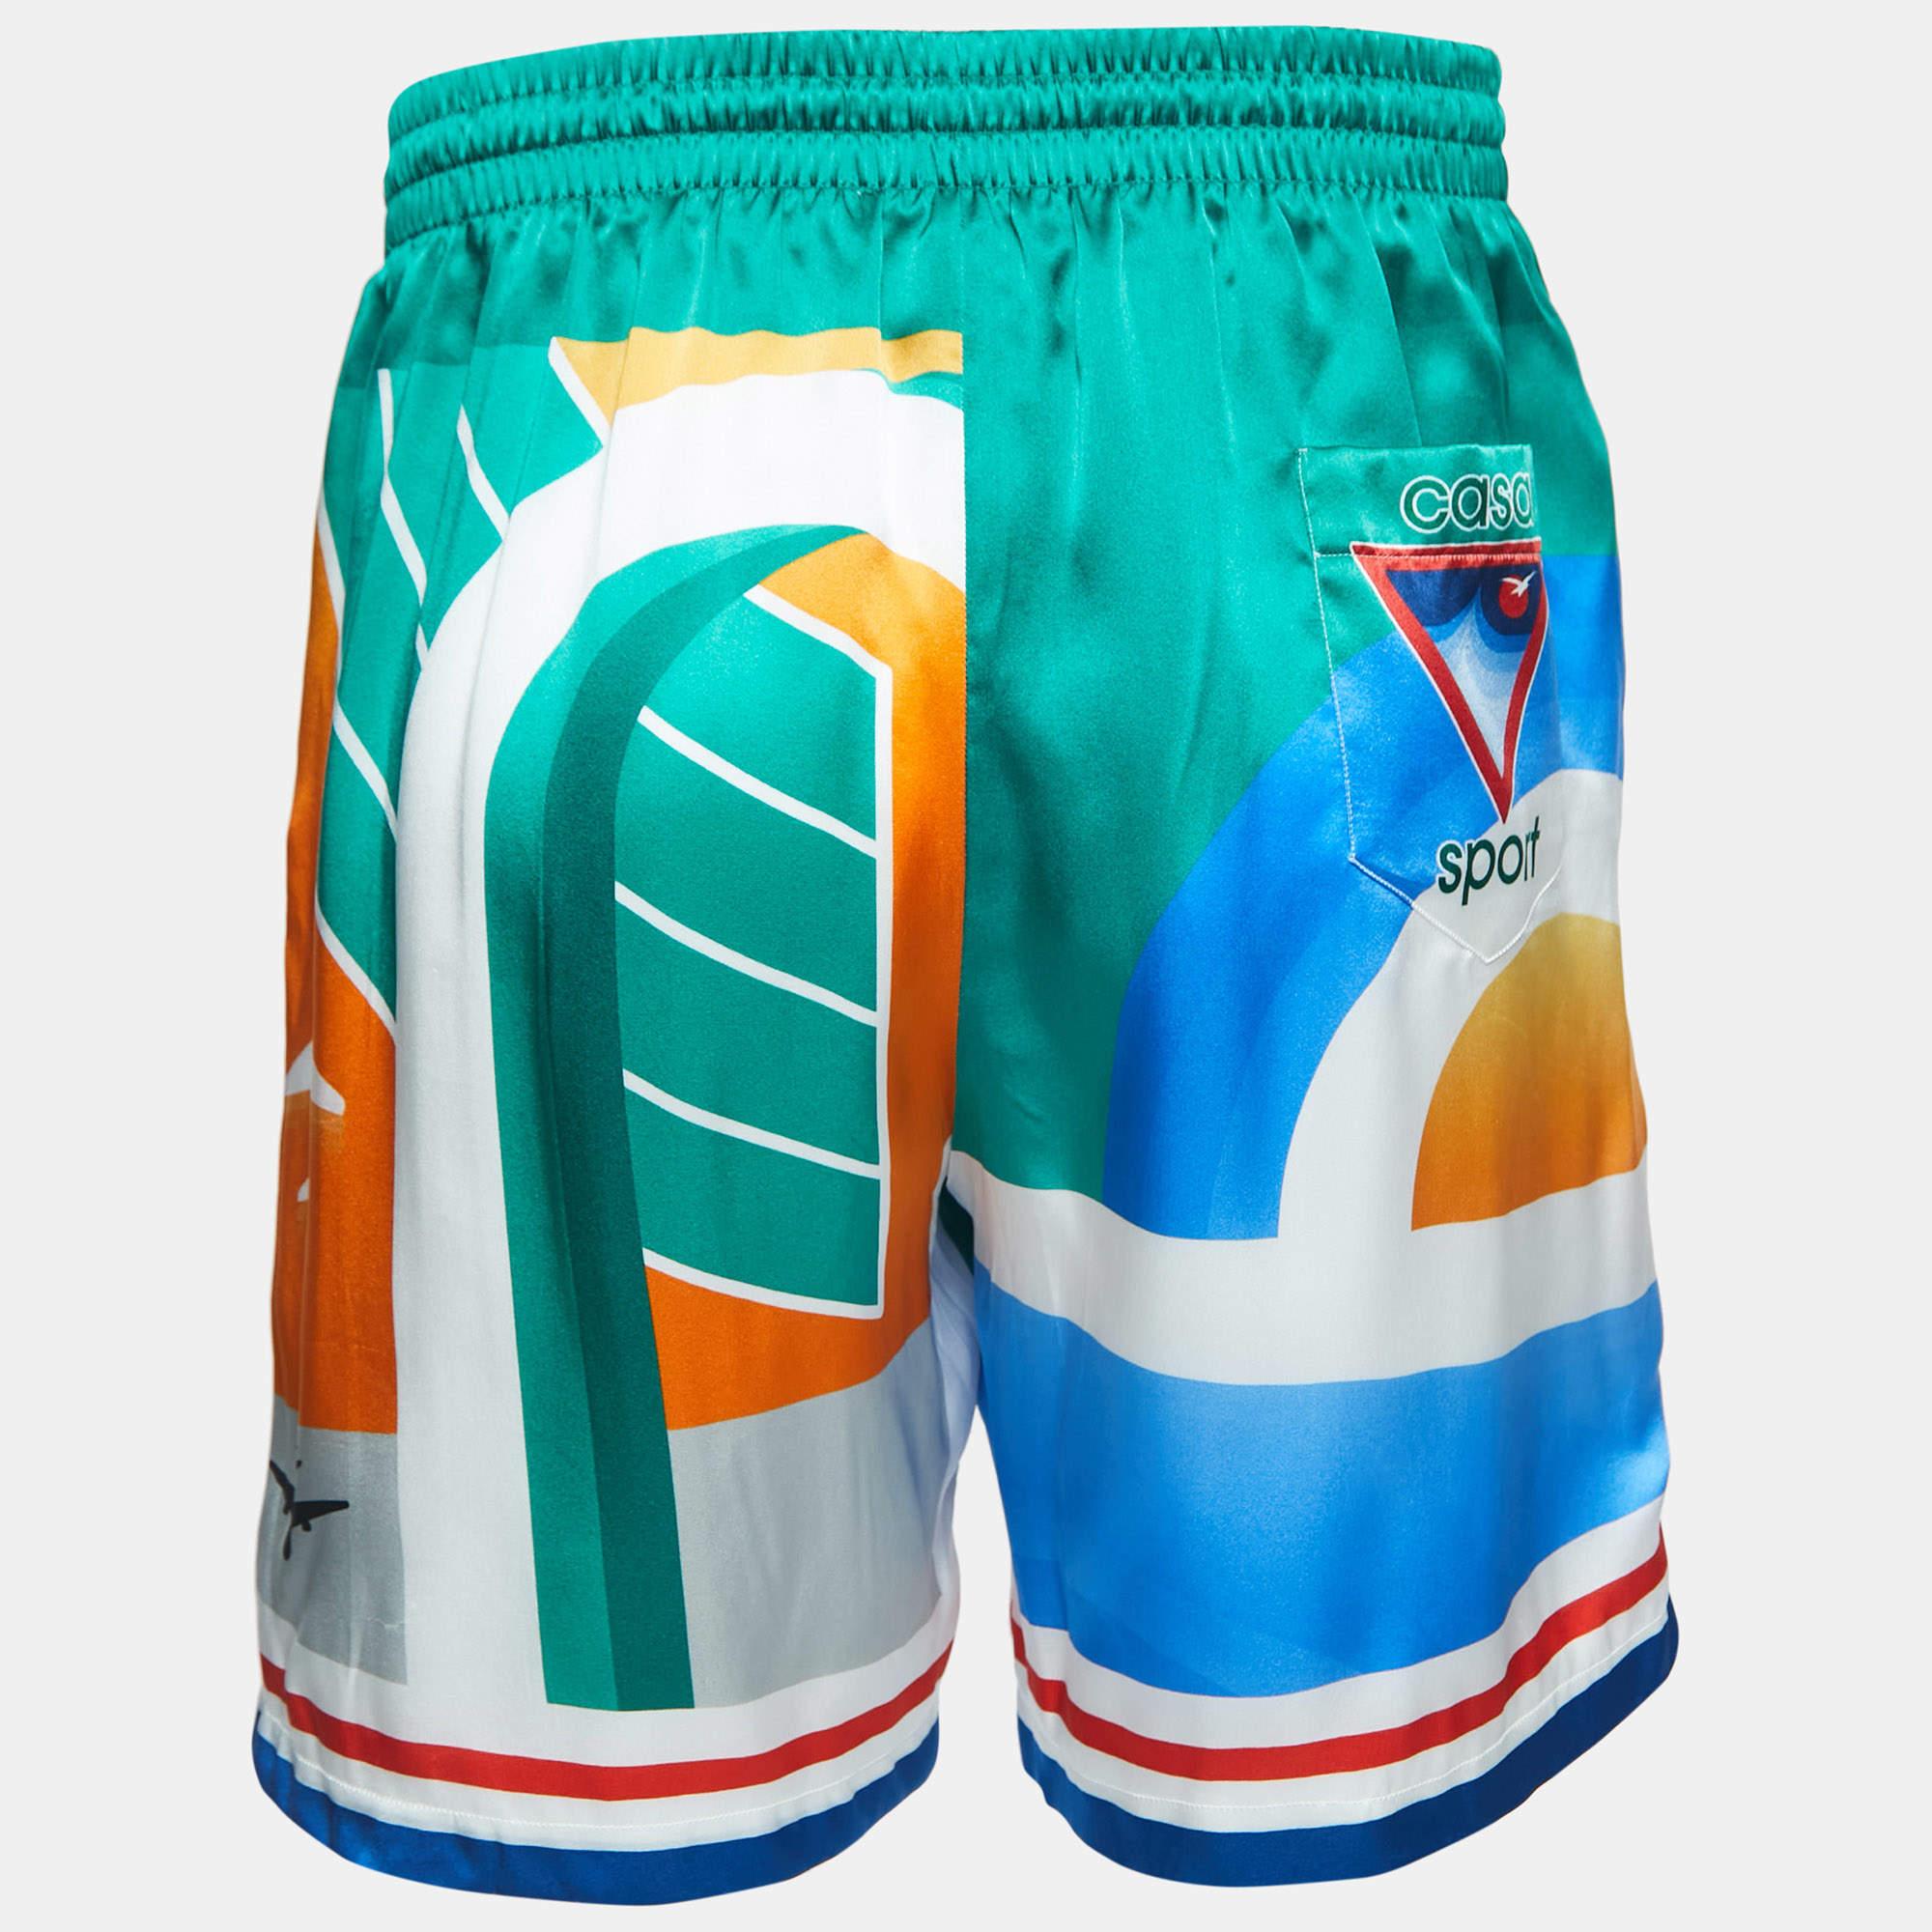 Beachy vacations call for a stylish pair of Casablanca shorts like this. Stitched using high-quality fabric, this pair of shorts is styled with classic details and has a superb length. Wear it with T-shirts.

